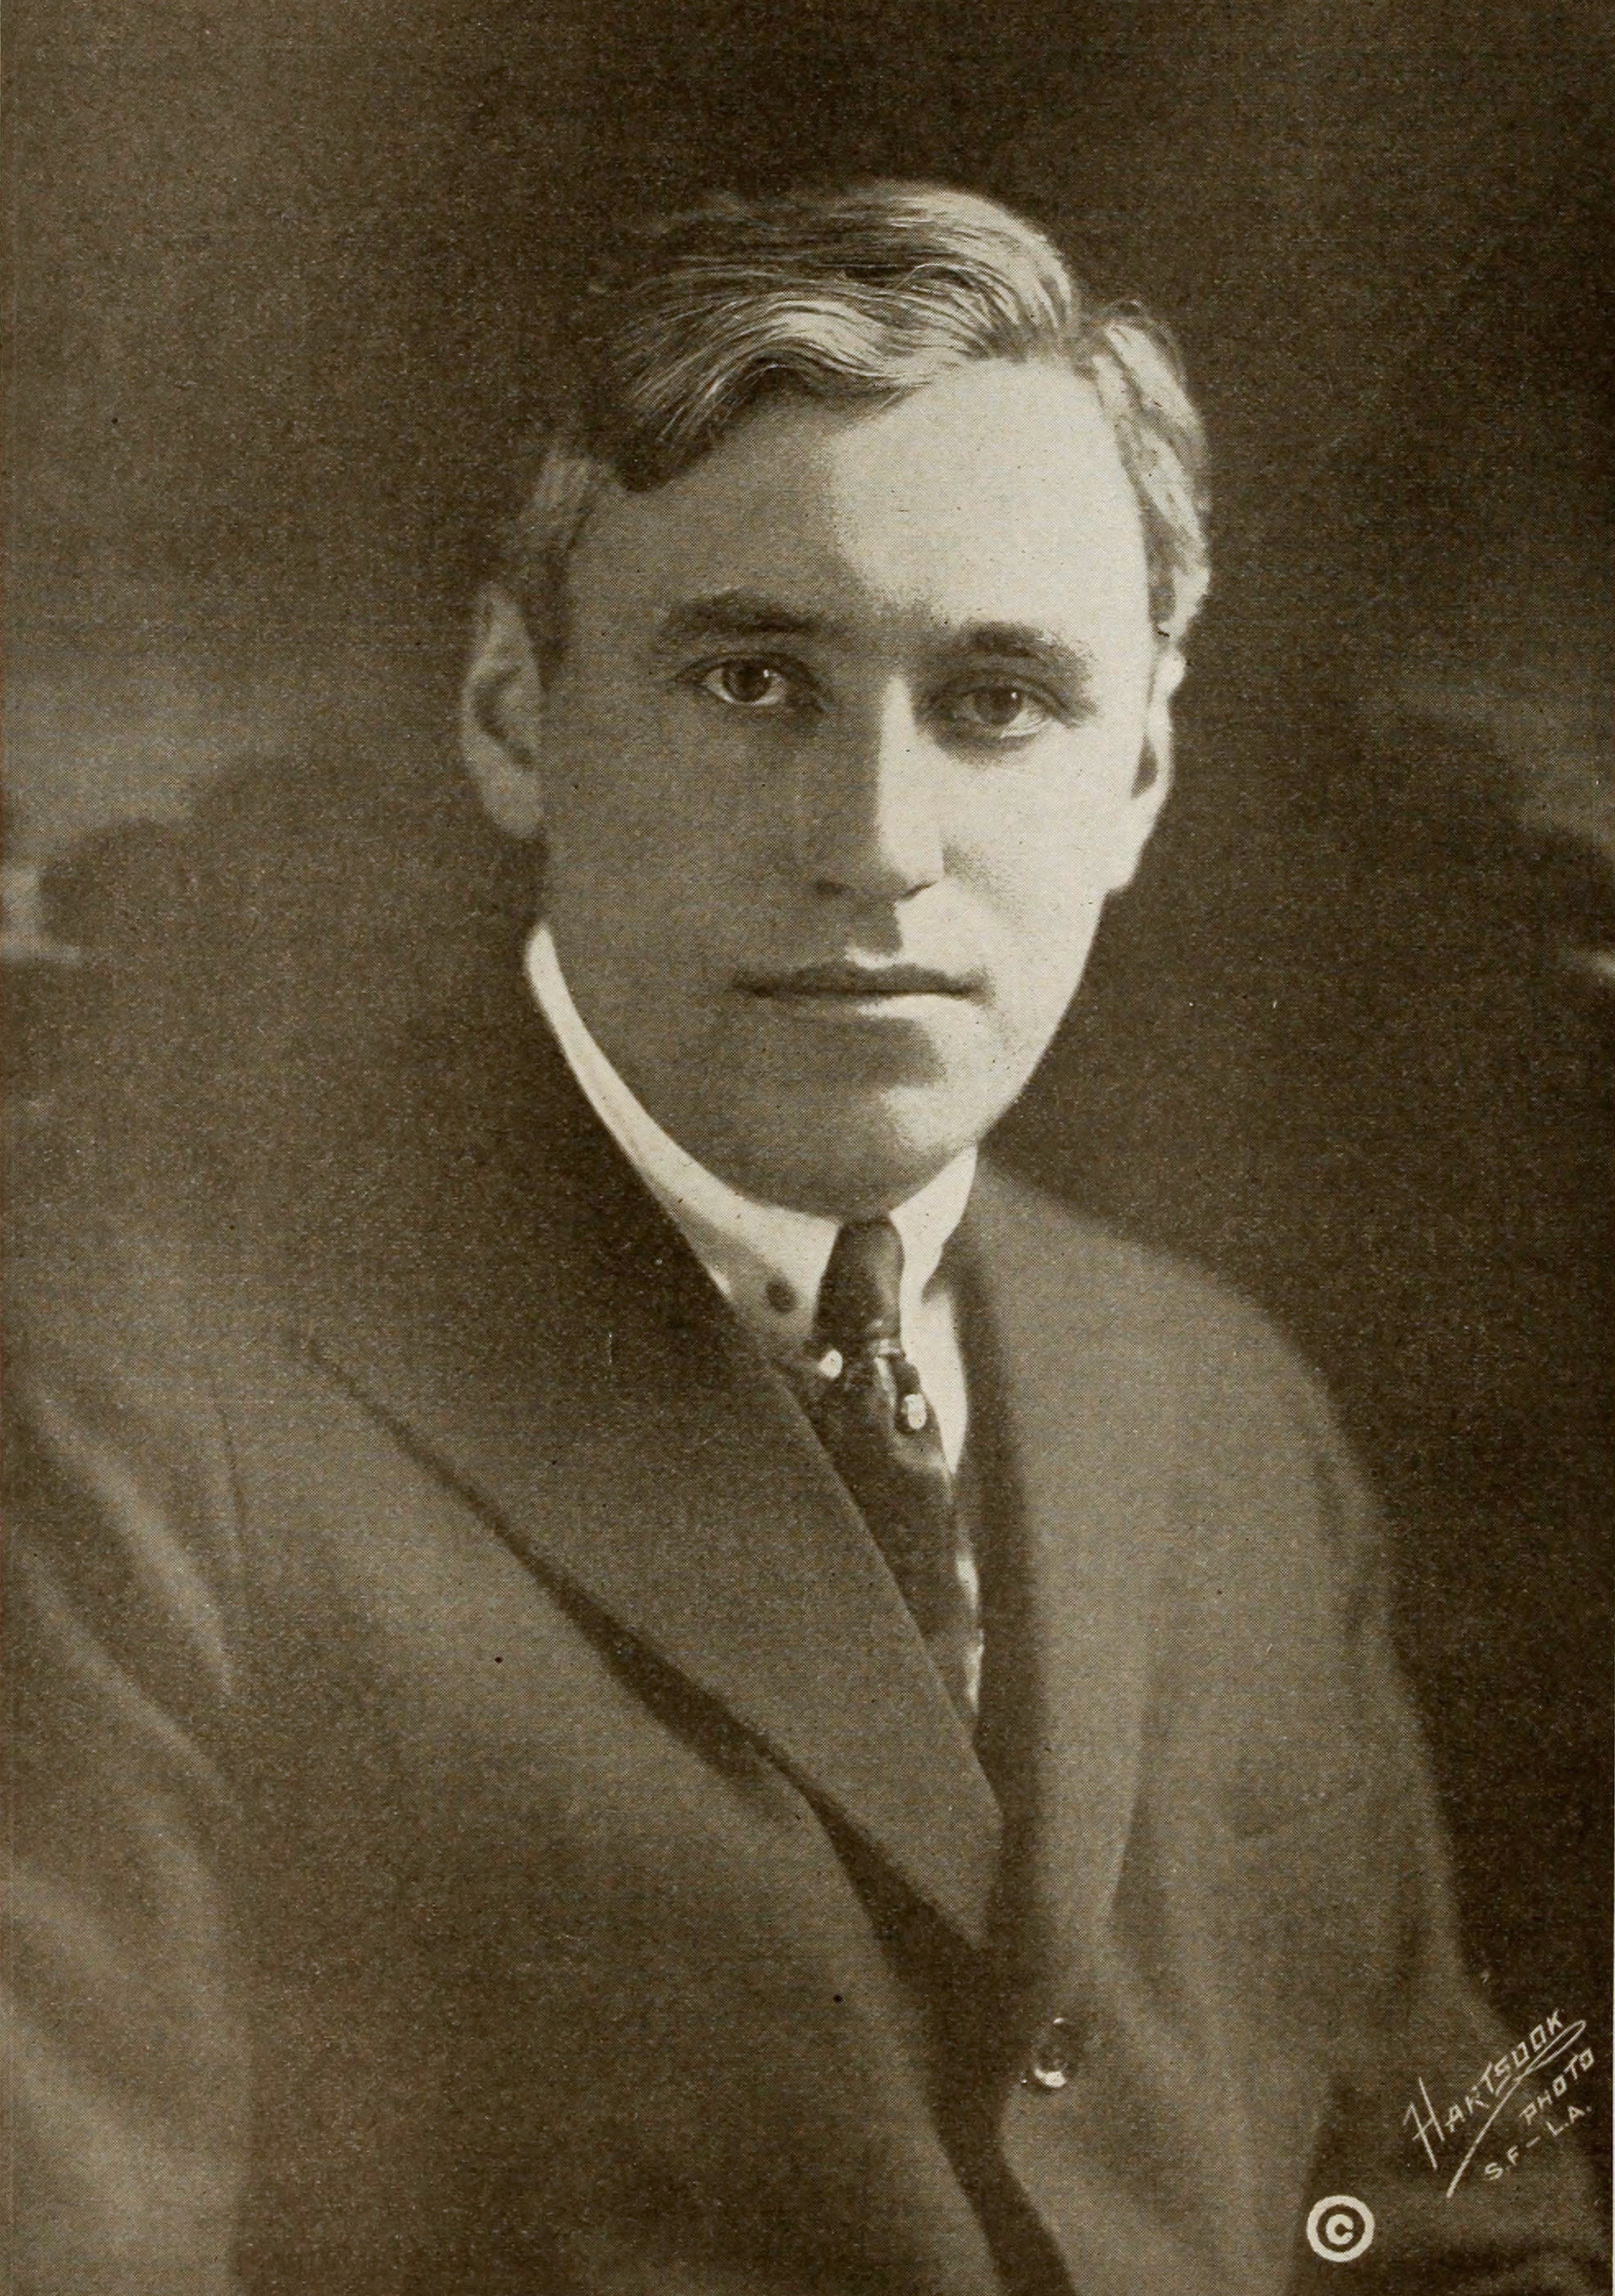 Mack Sennett, Canadian-American actor, director, and producer (d. 1960) was born on January 17, 1880.